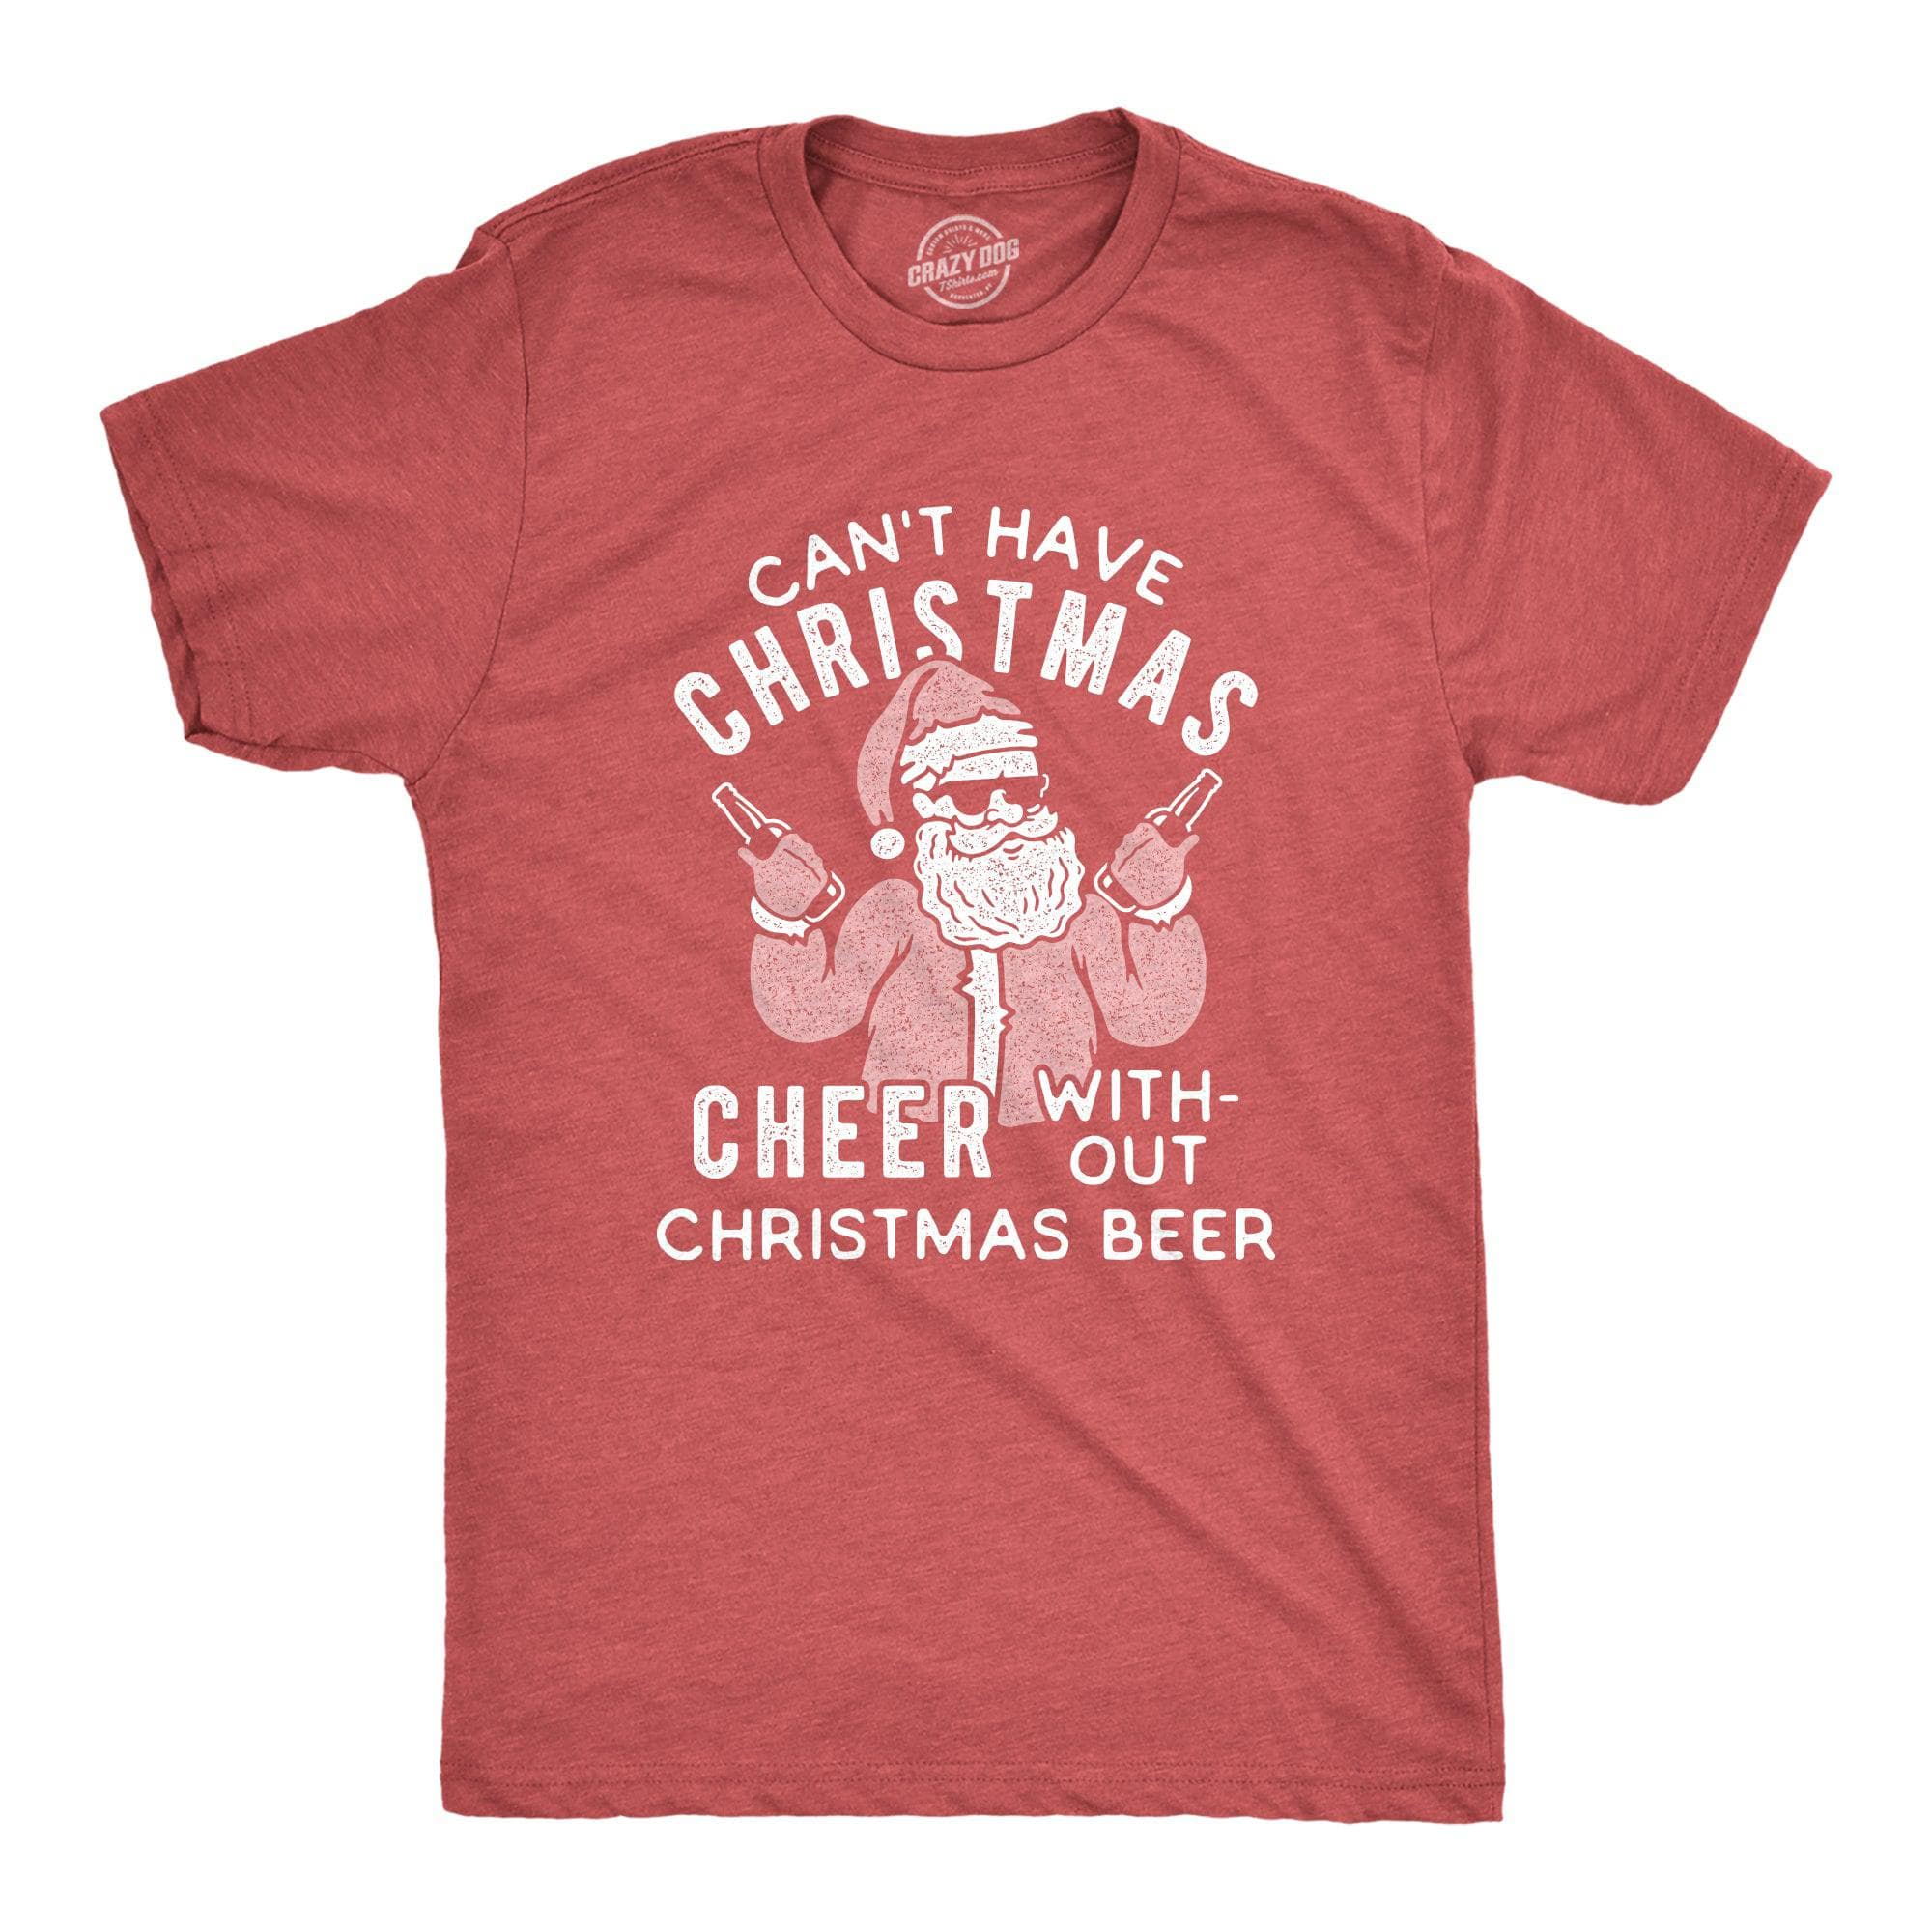 Can't Have Christmas Cheer Without Christmas Beer Men's Tshirt  -  Crazy Dog T-Shirts